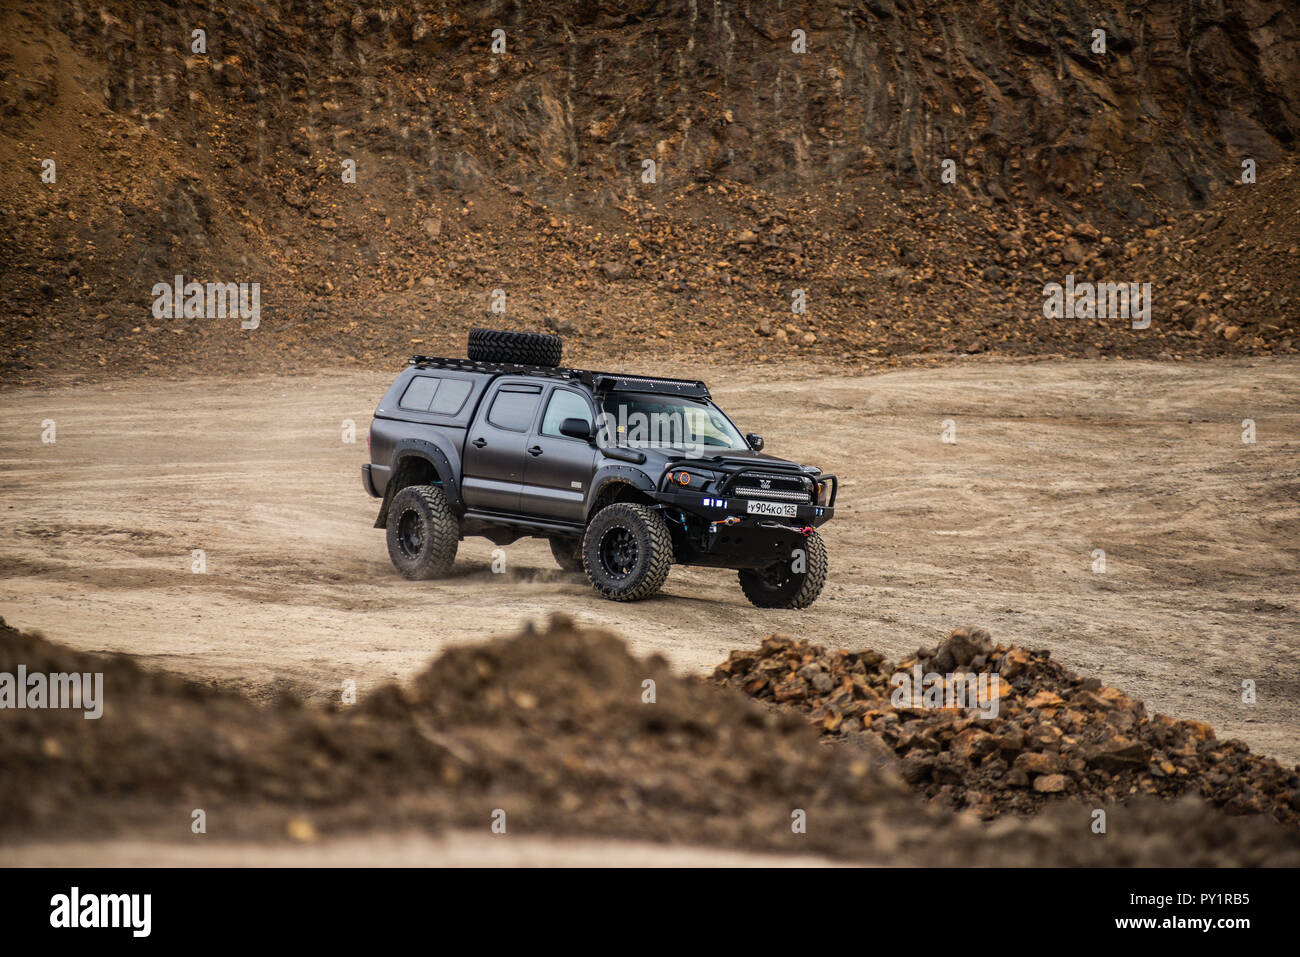 KHABAROVSK, RUSSIA - october 7, 2018: Toyota Tacoma quick ride on a offroad Stock Photo